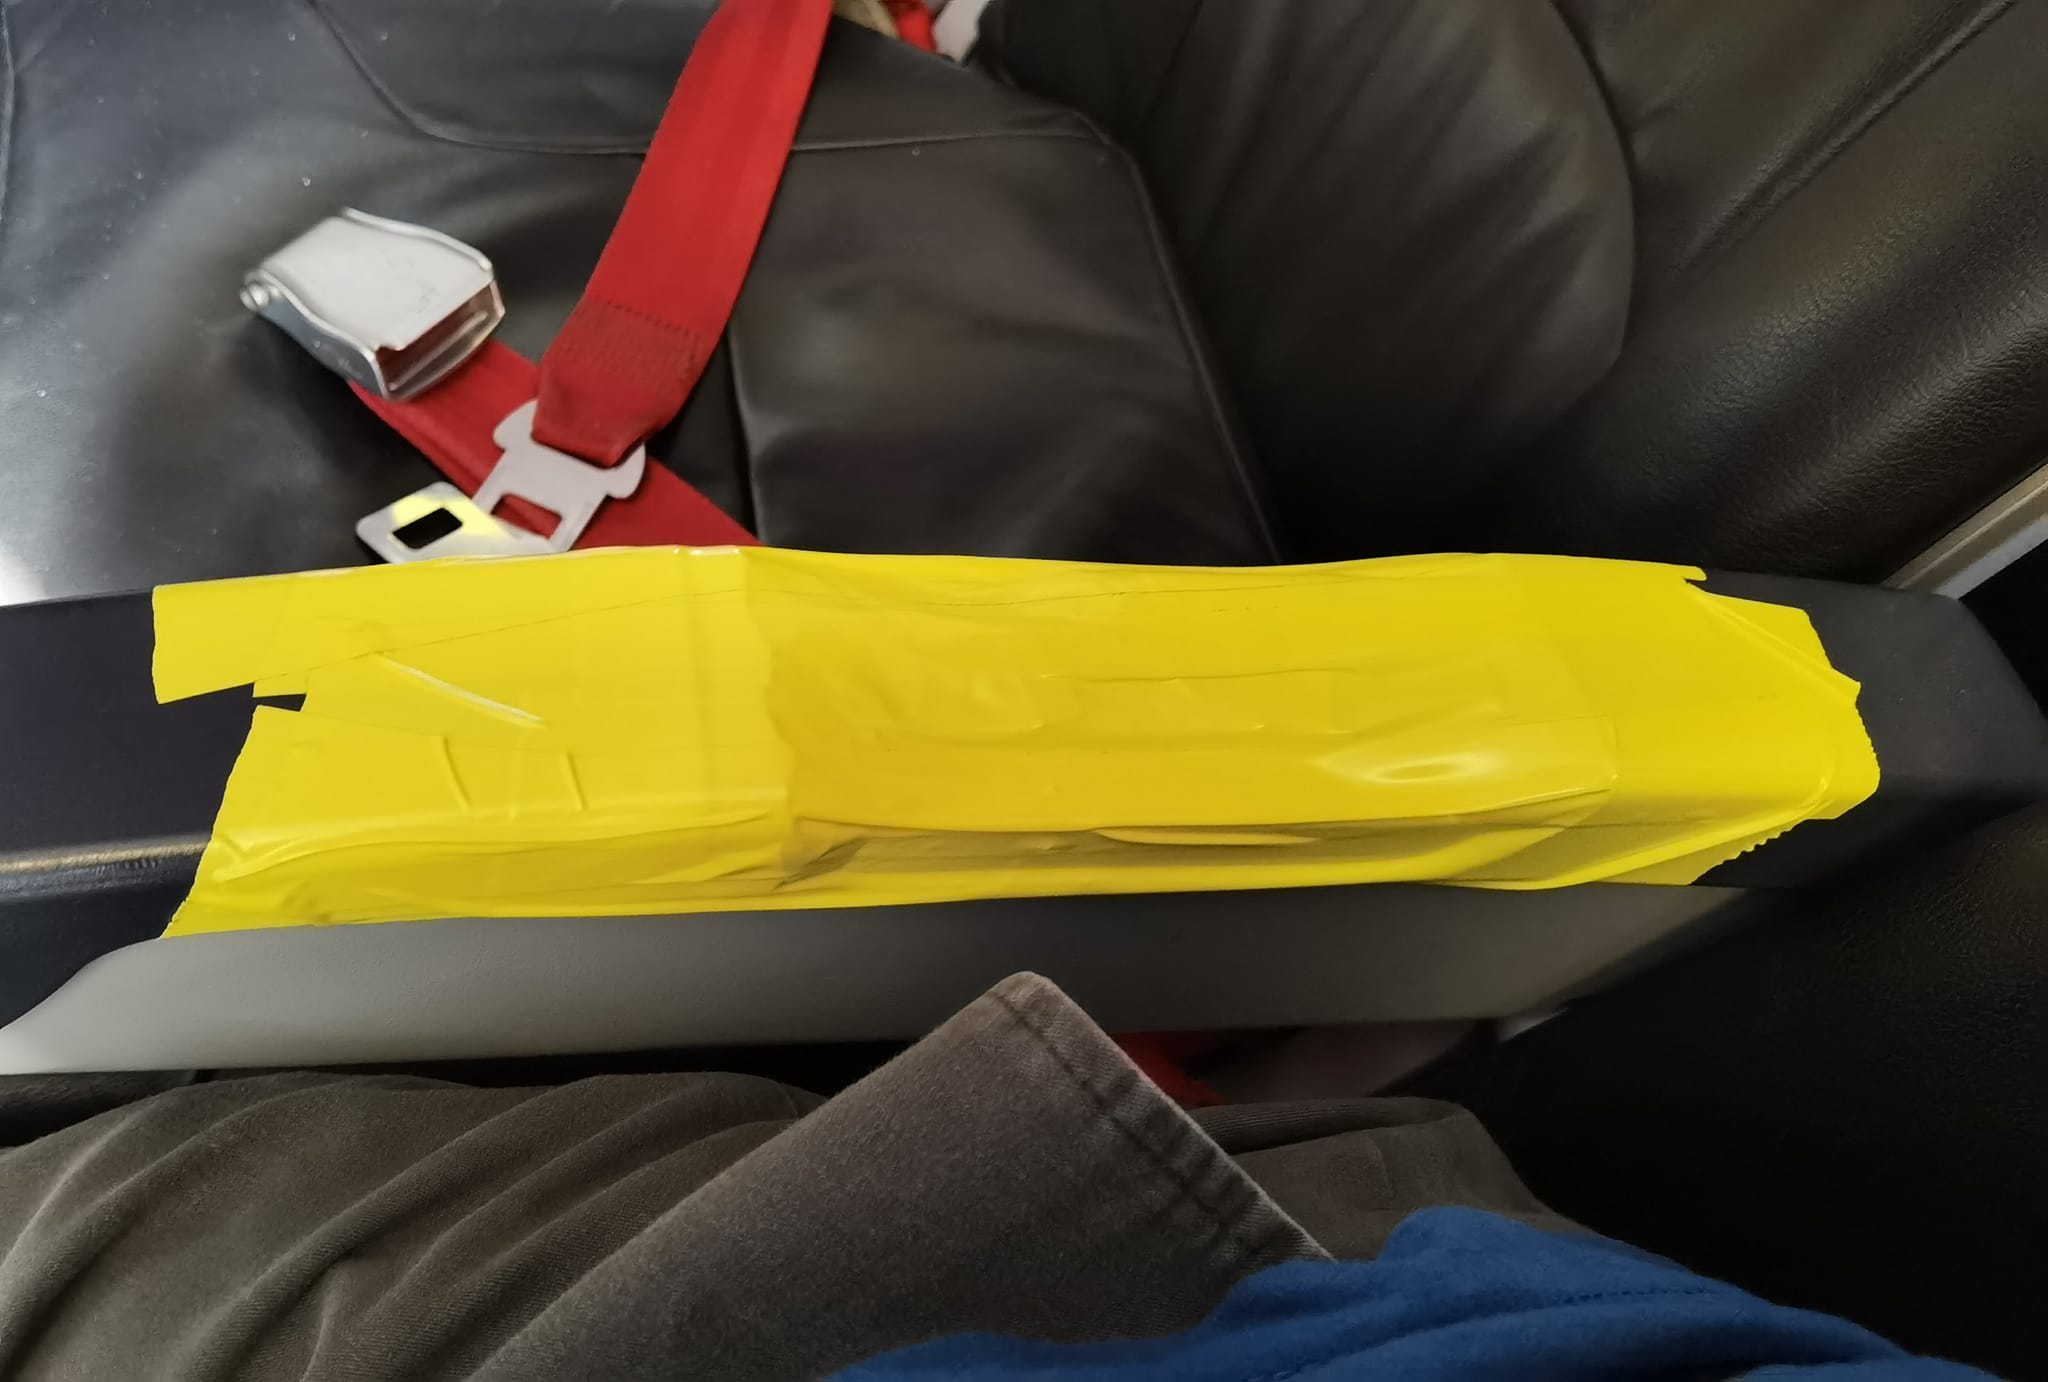 Airasia: taped armrests was due to spare parts shortage, not safety issues | weirdkaya